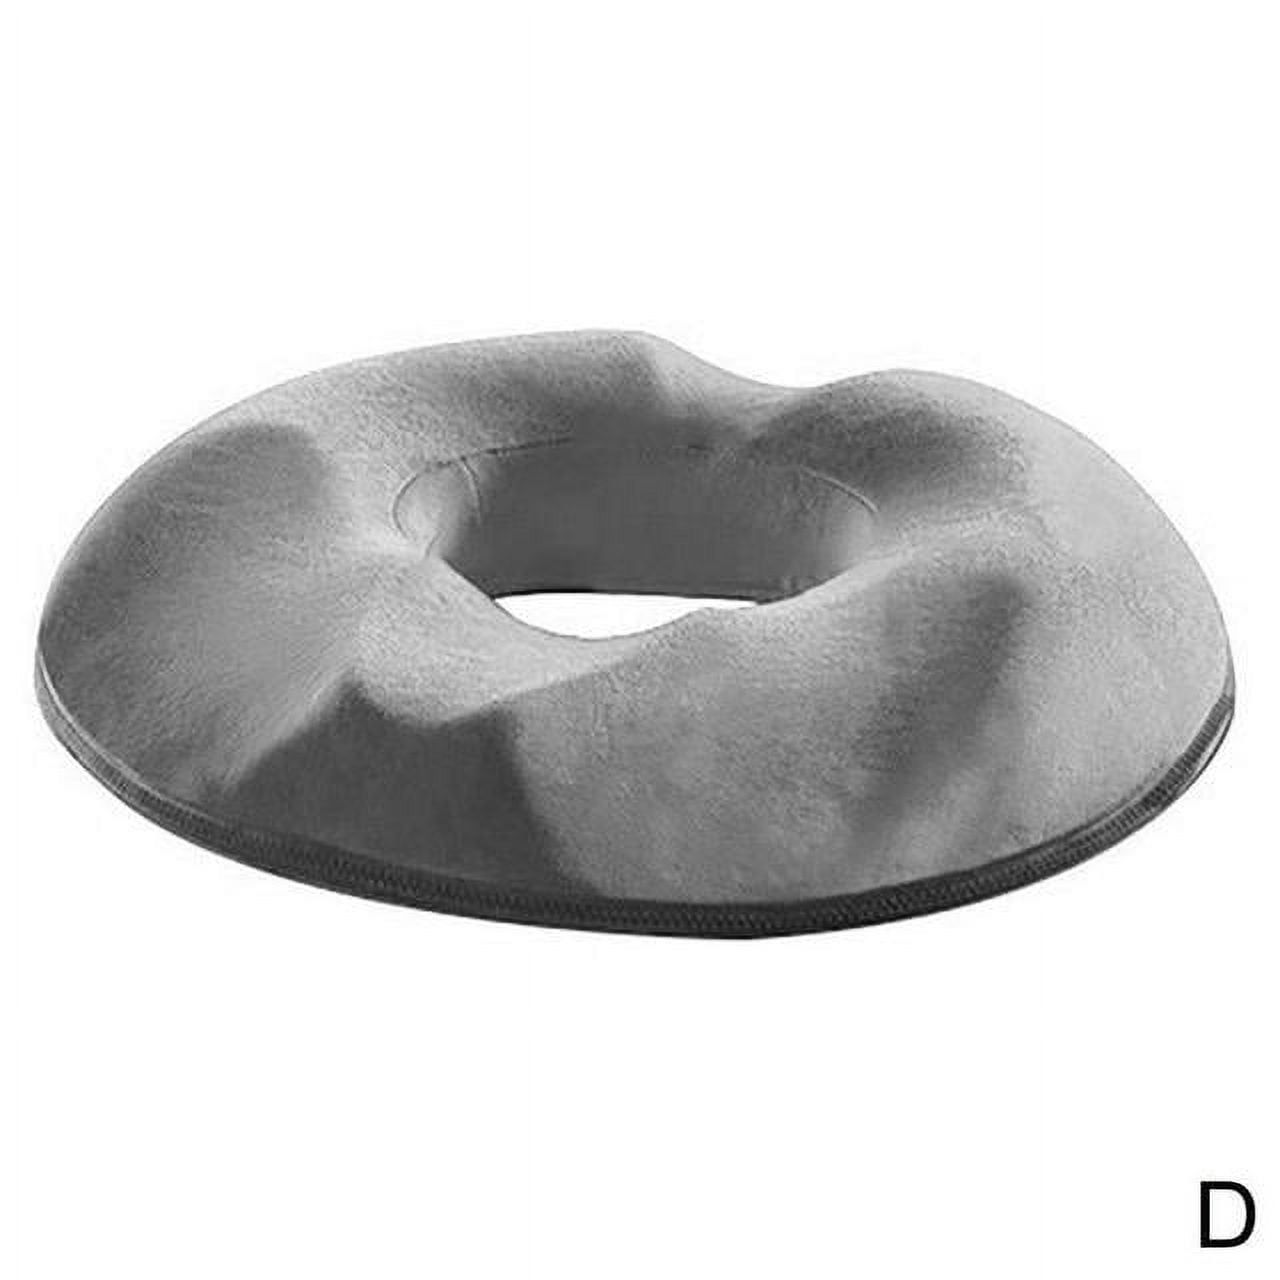 HUISILK Donut Pillow for Tailbone Pain - Memory Foam Car Office Chair Seat Cushion - Hemorrhoid Cushions Relief Support Bed Sores , Prostate , Coccyx